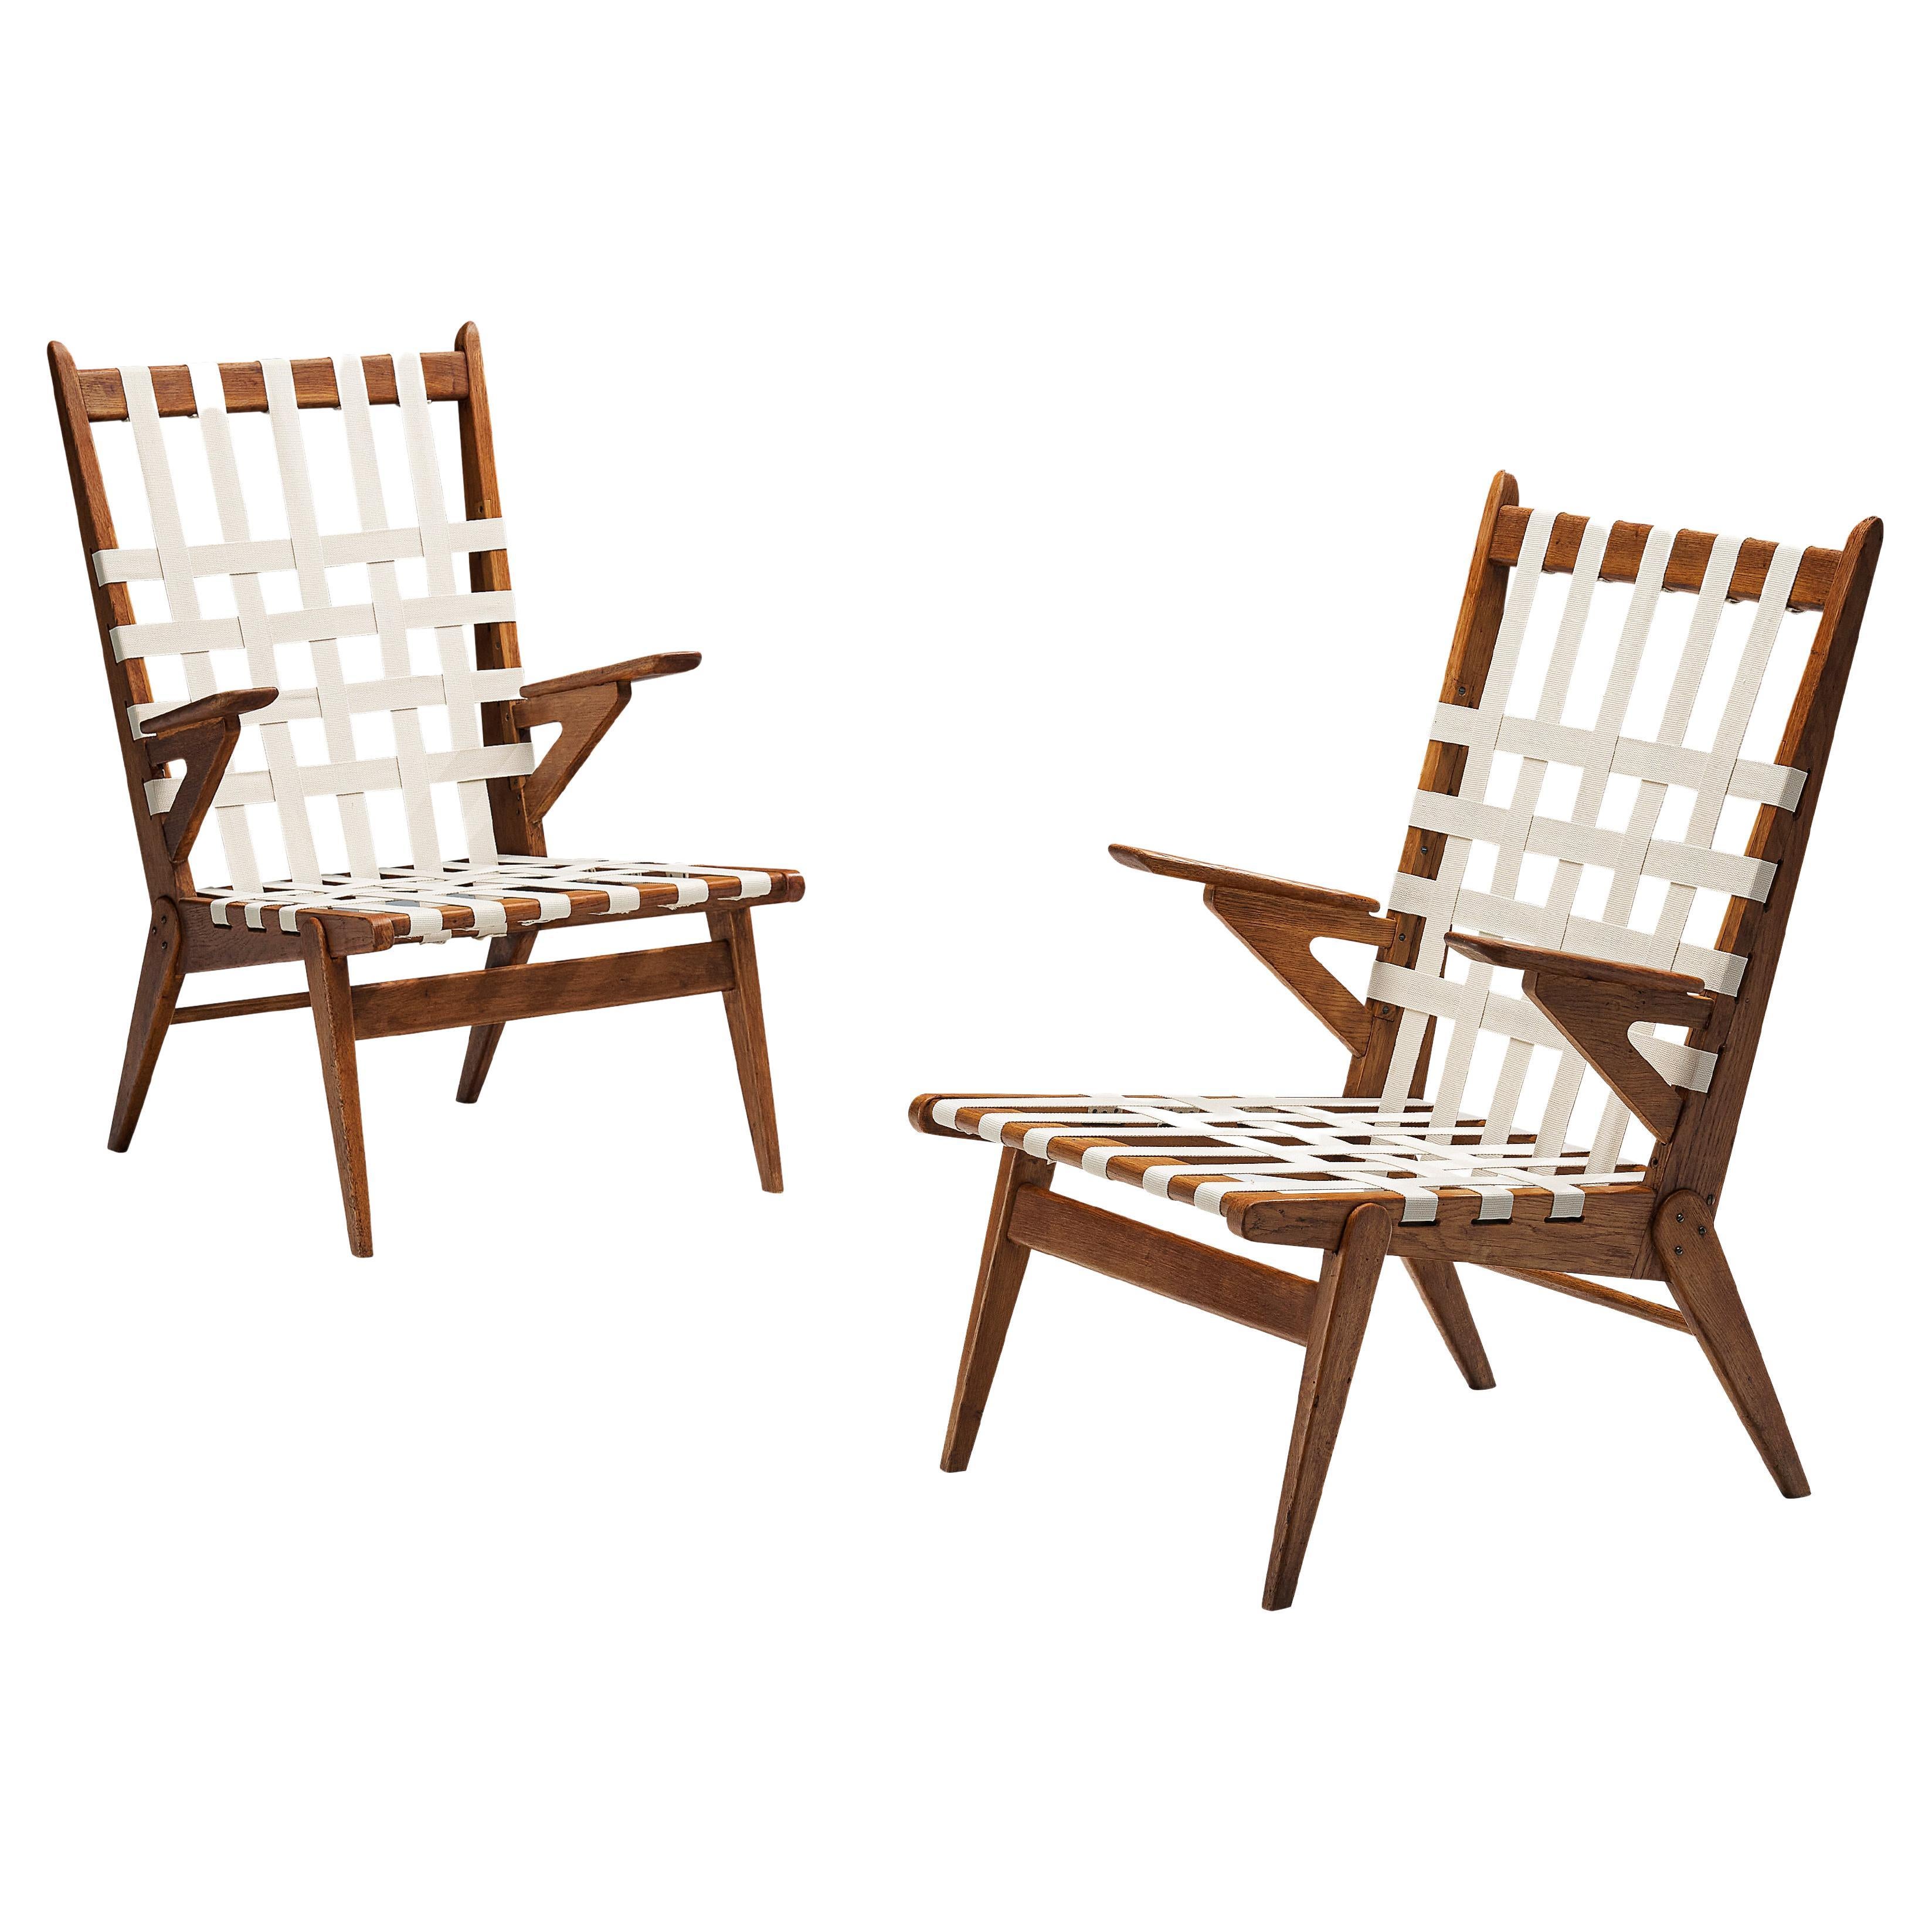 Sculptural Pair of Lounge Chairs in Oak